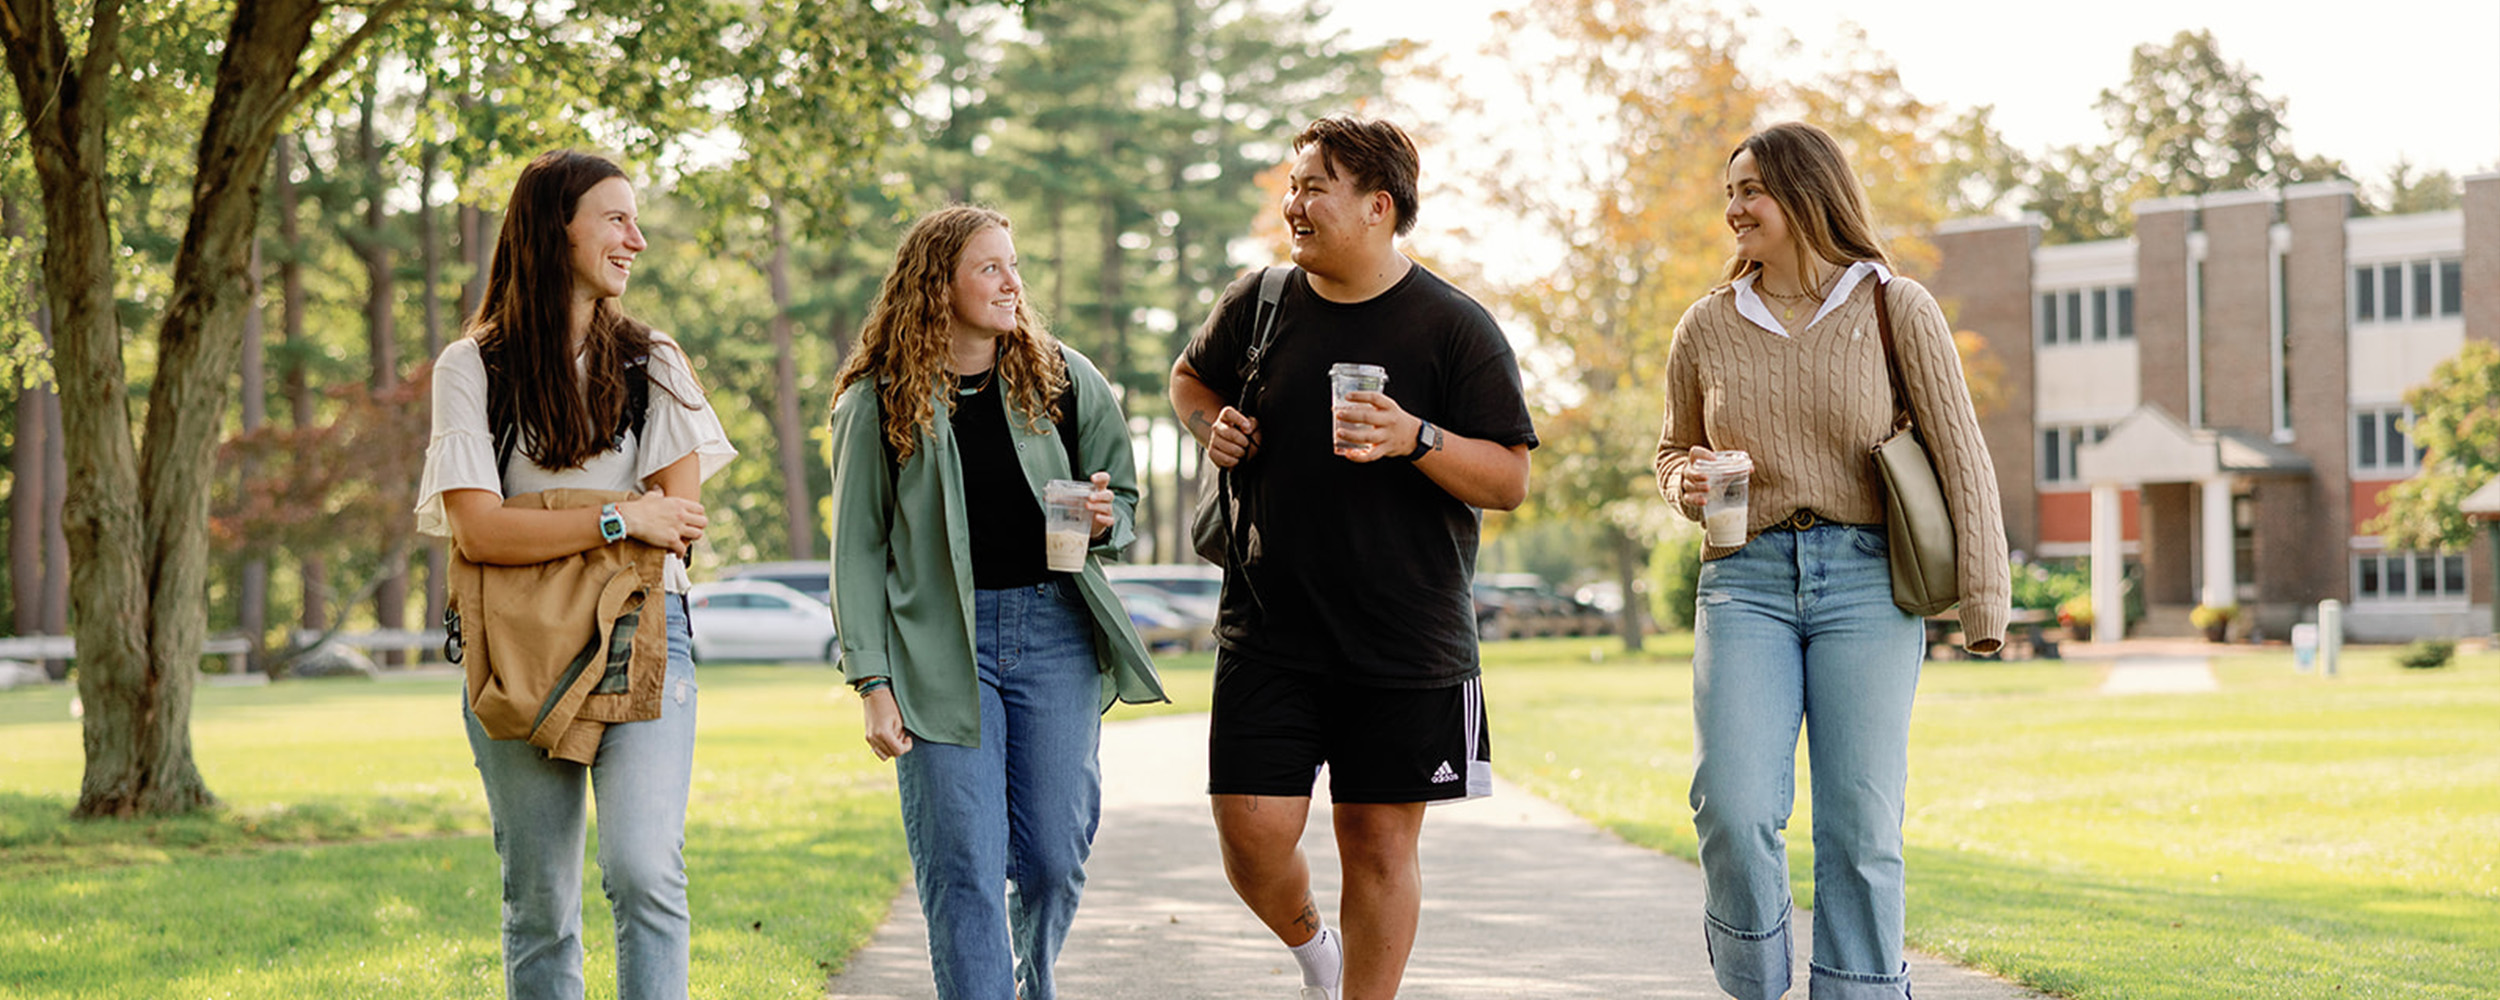 students walking with coffee